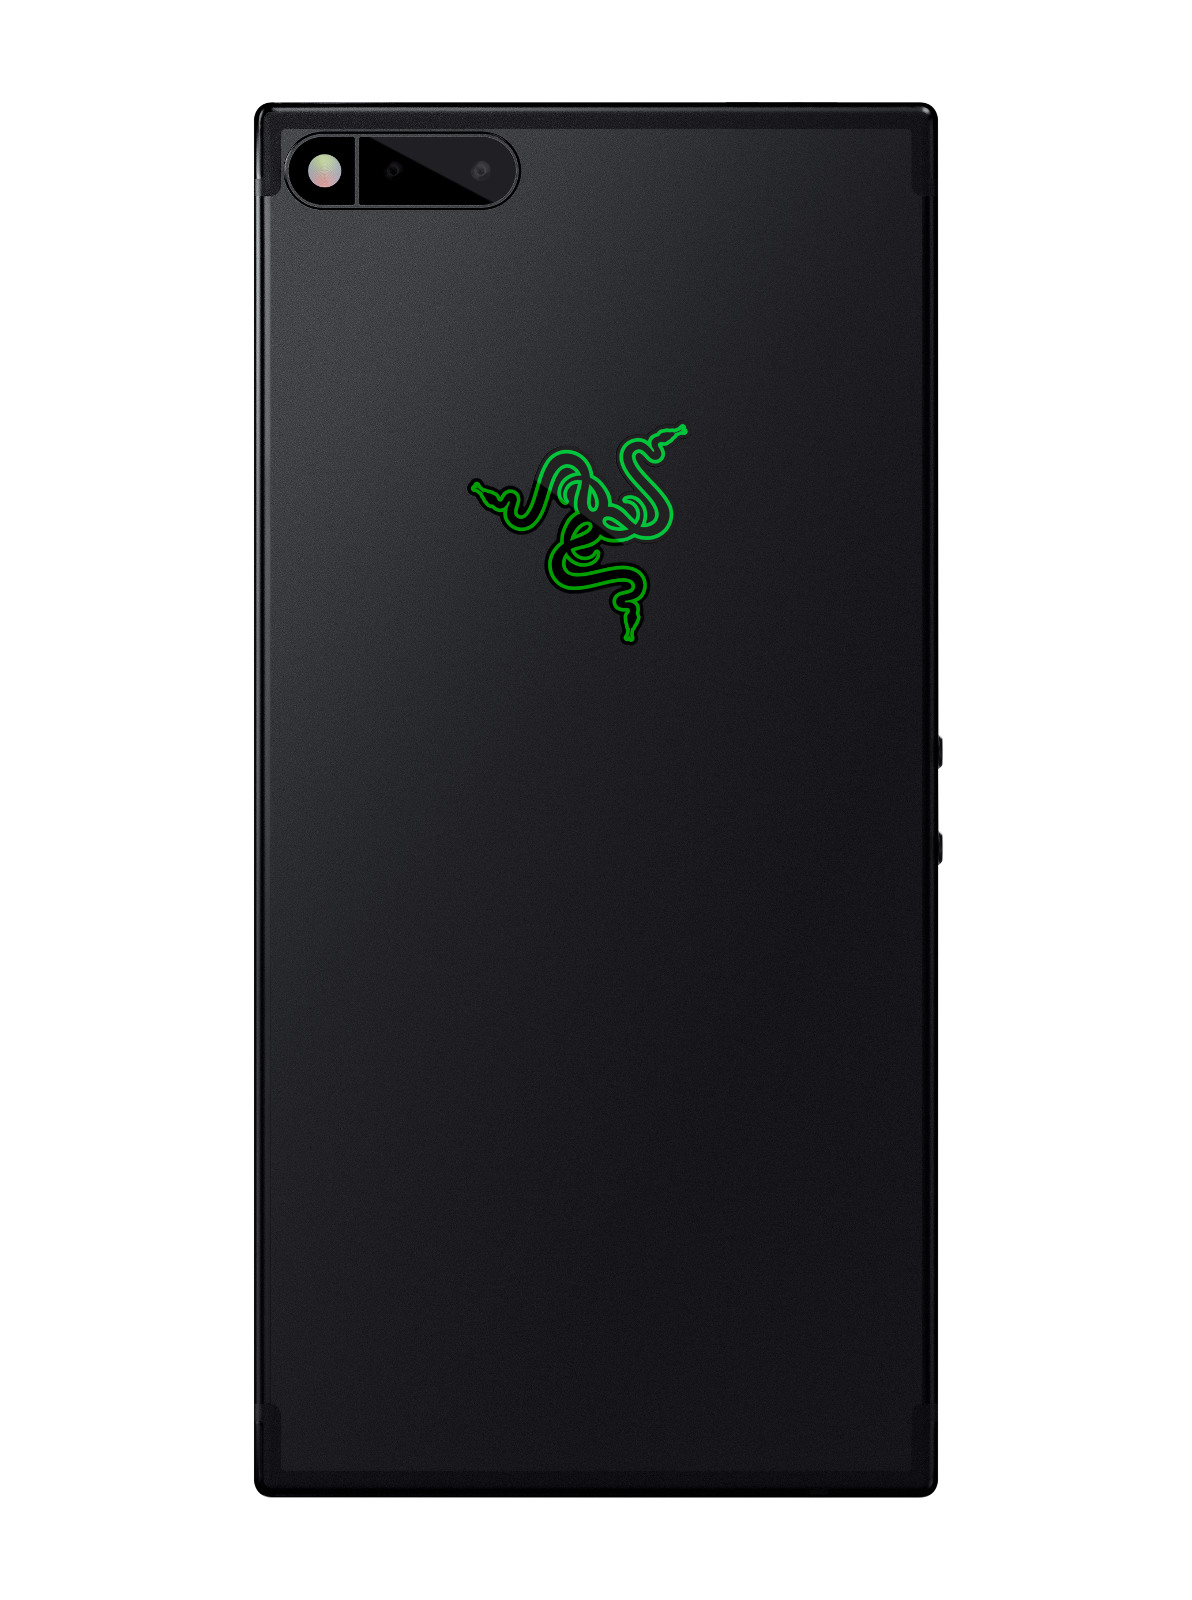 Special-Edition-Razer-Phone-will-have-a-green-logo-on-the-back.jpg